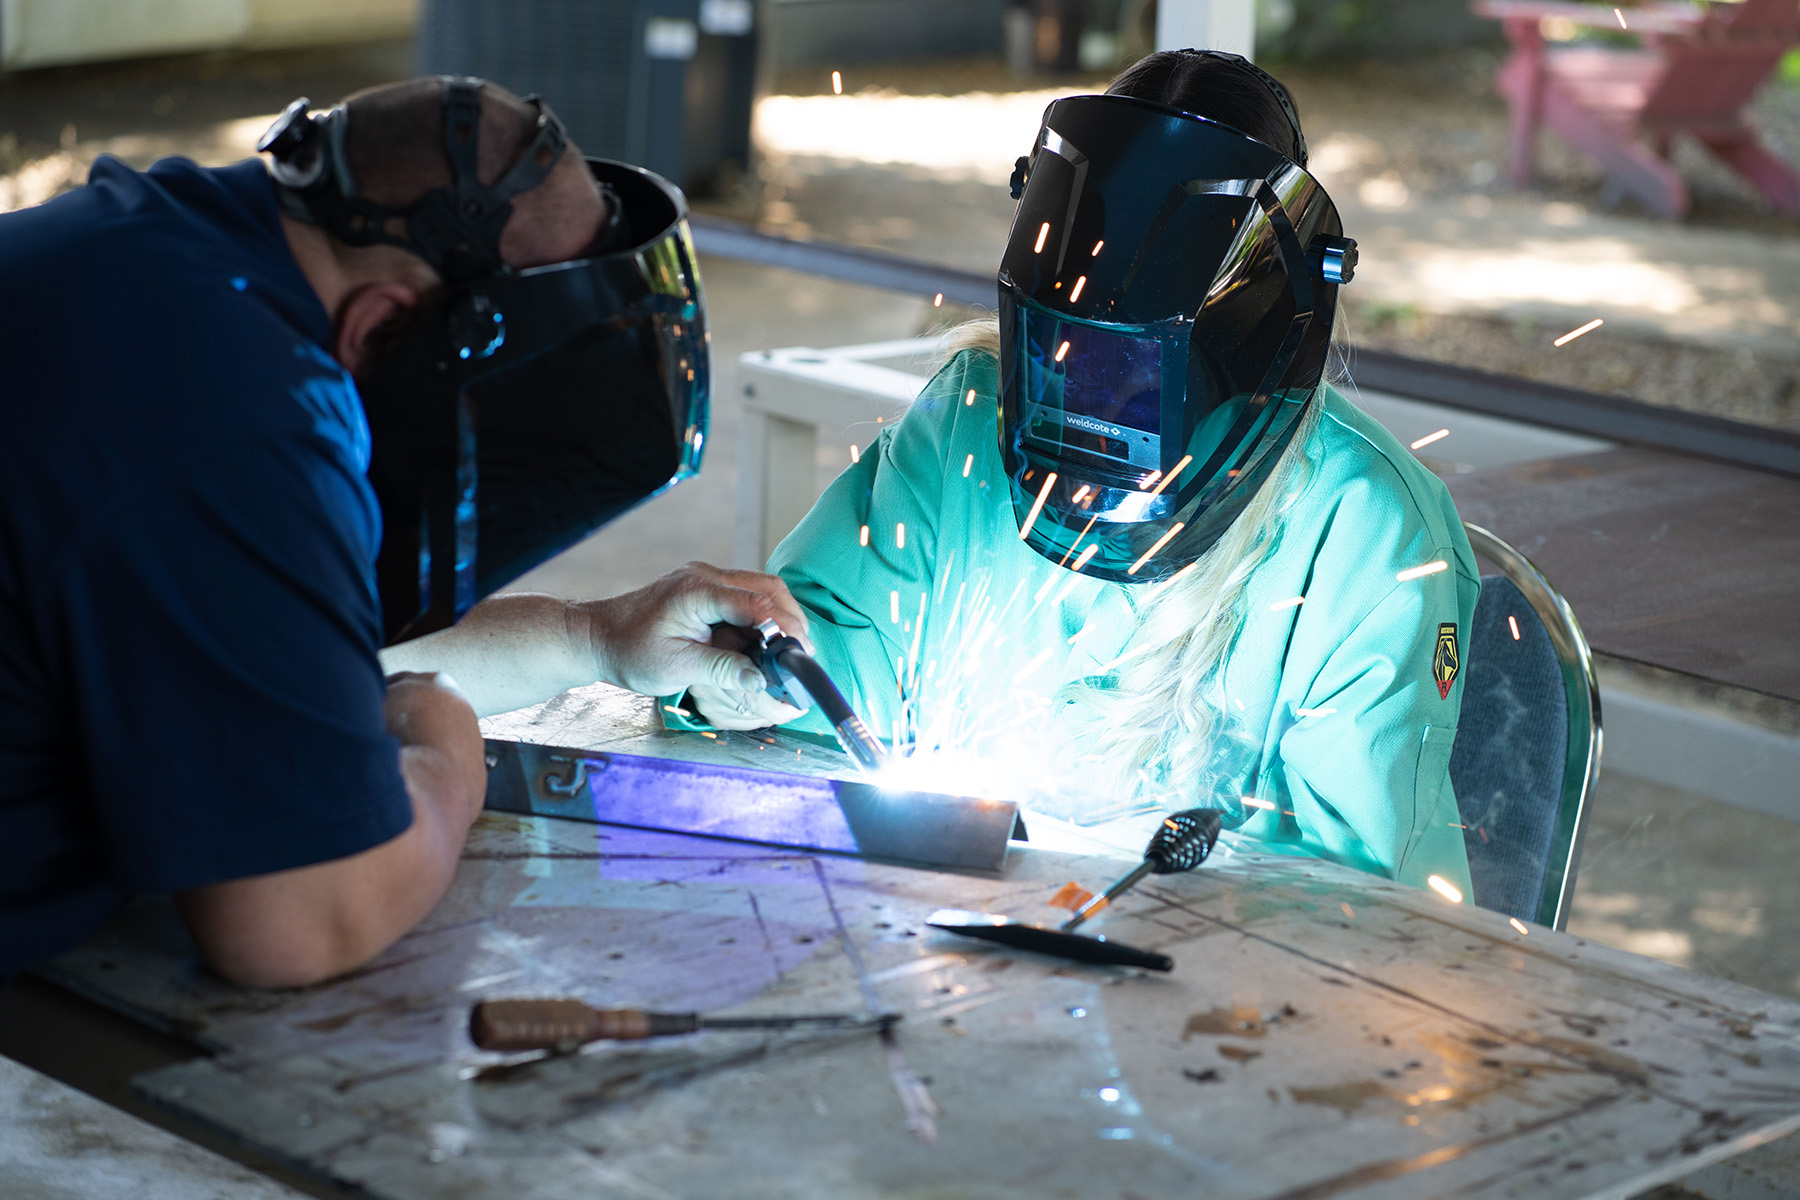 A young woman is introduced to welding at Project LIFT